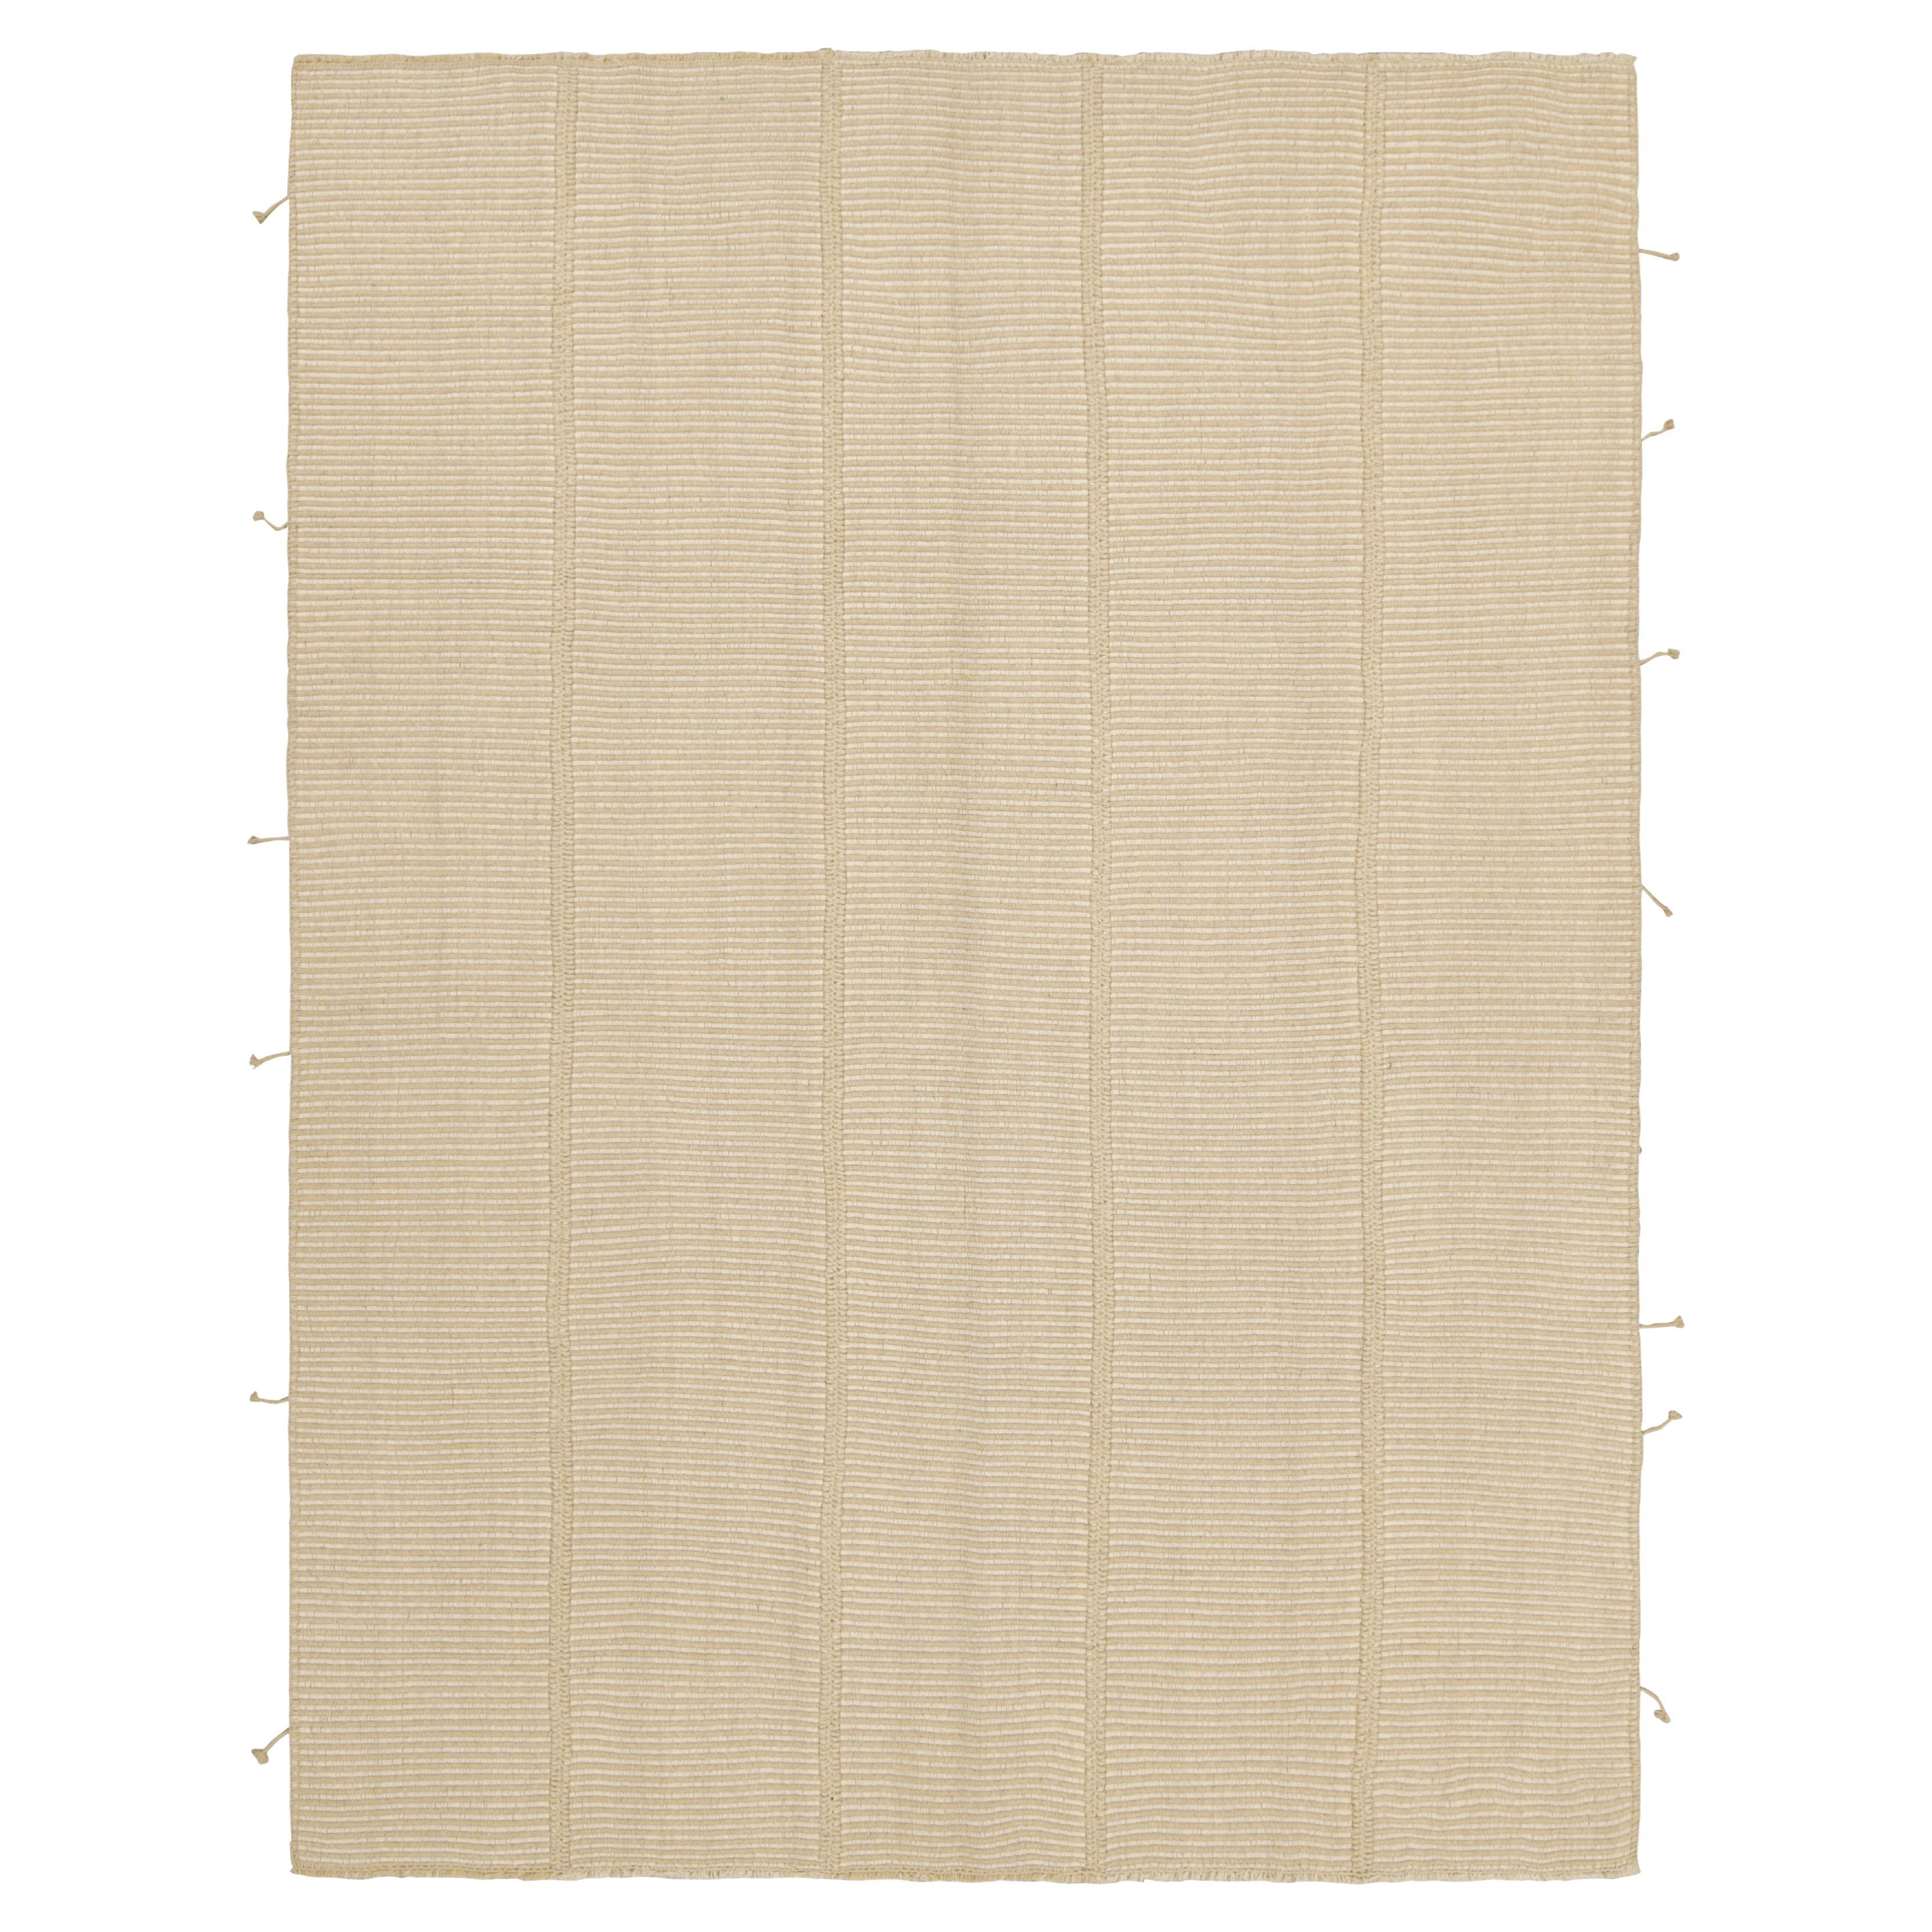 Rug & Kilim’s Contemporary Kilim in Cream White and Beige Textural Stripes For Sale